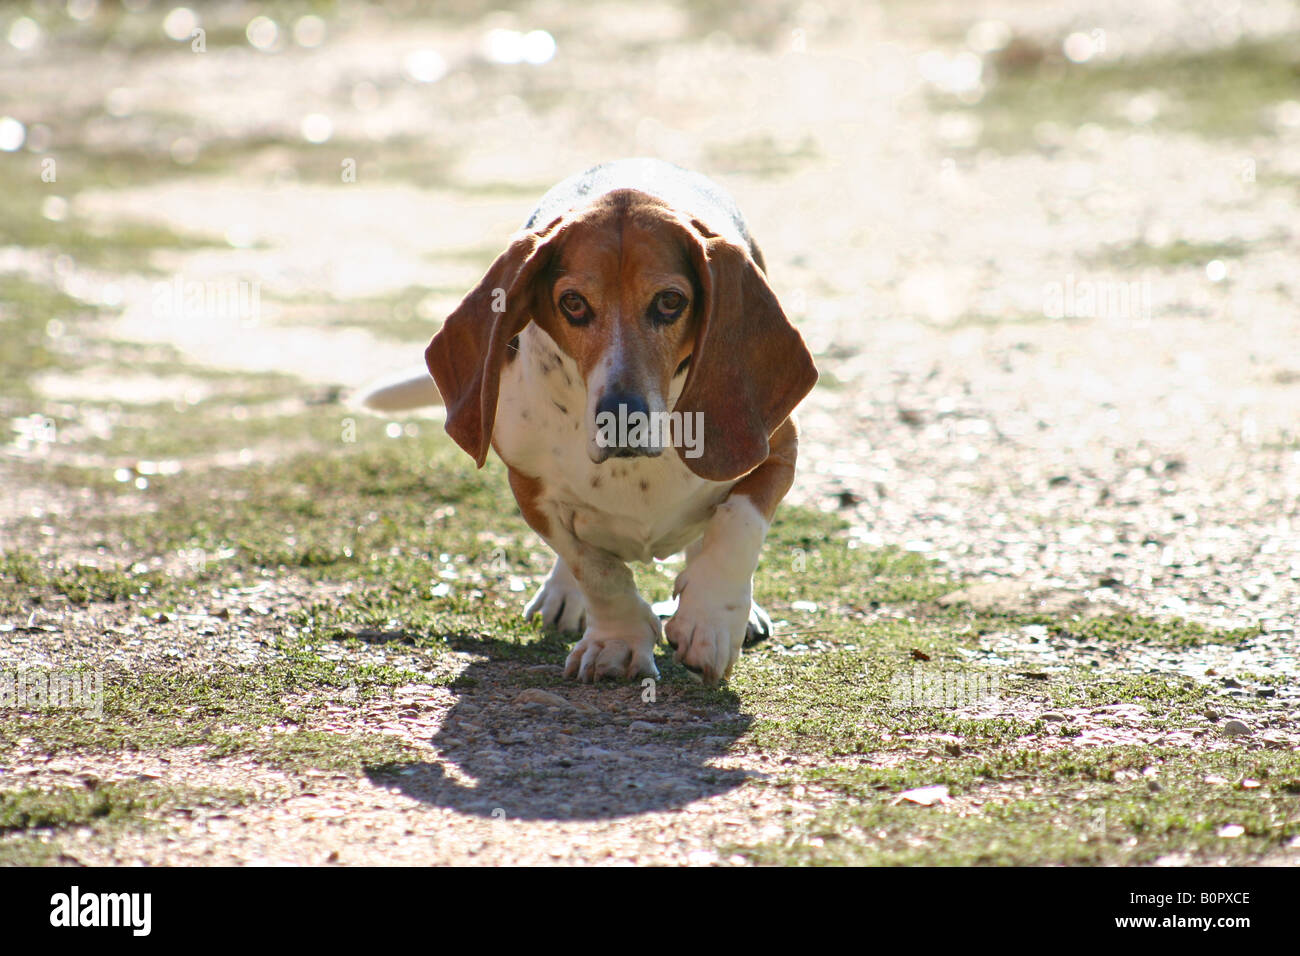 A basset hound on a walk without a leash. Stock Photo